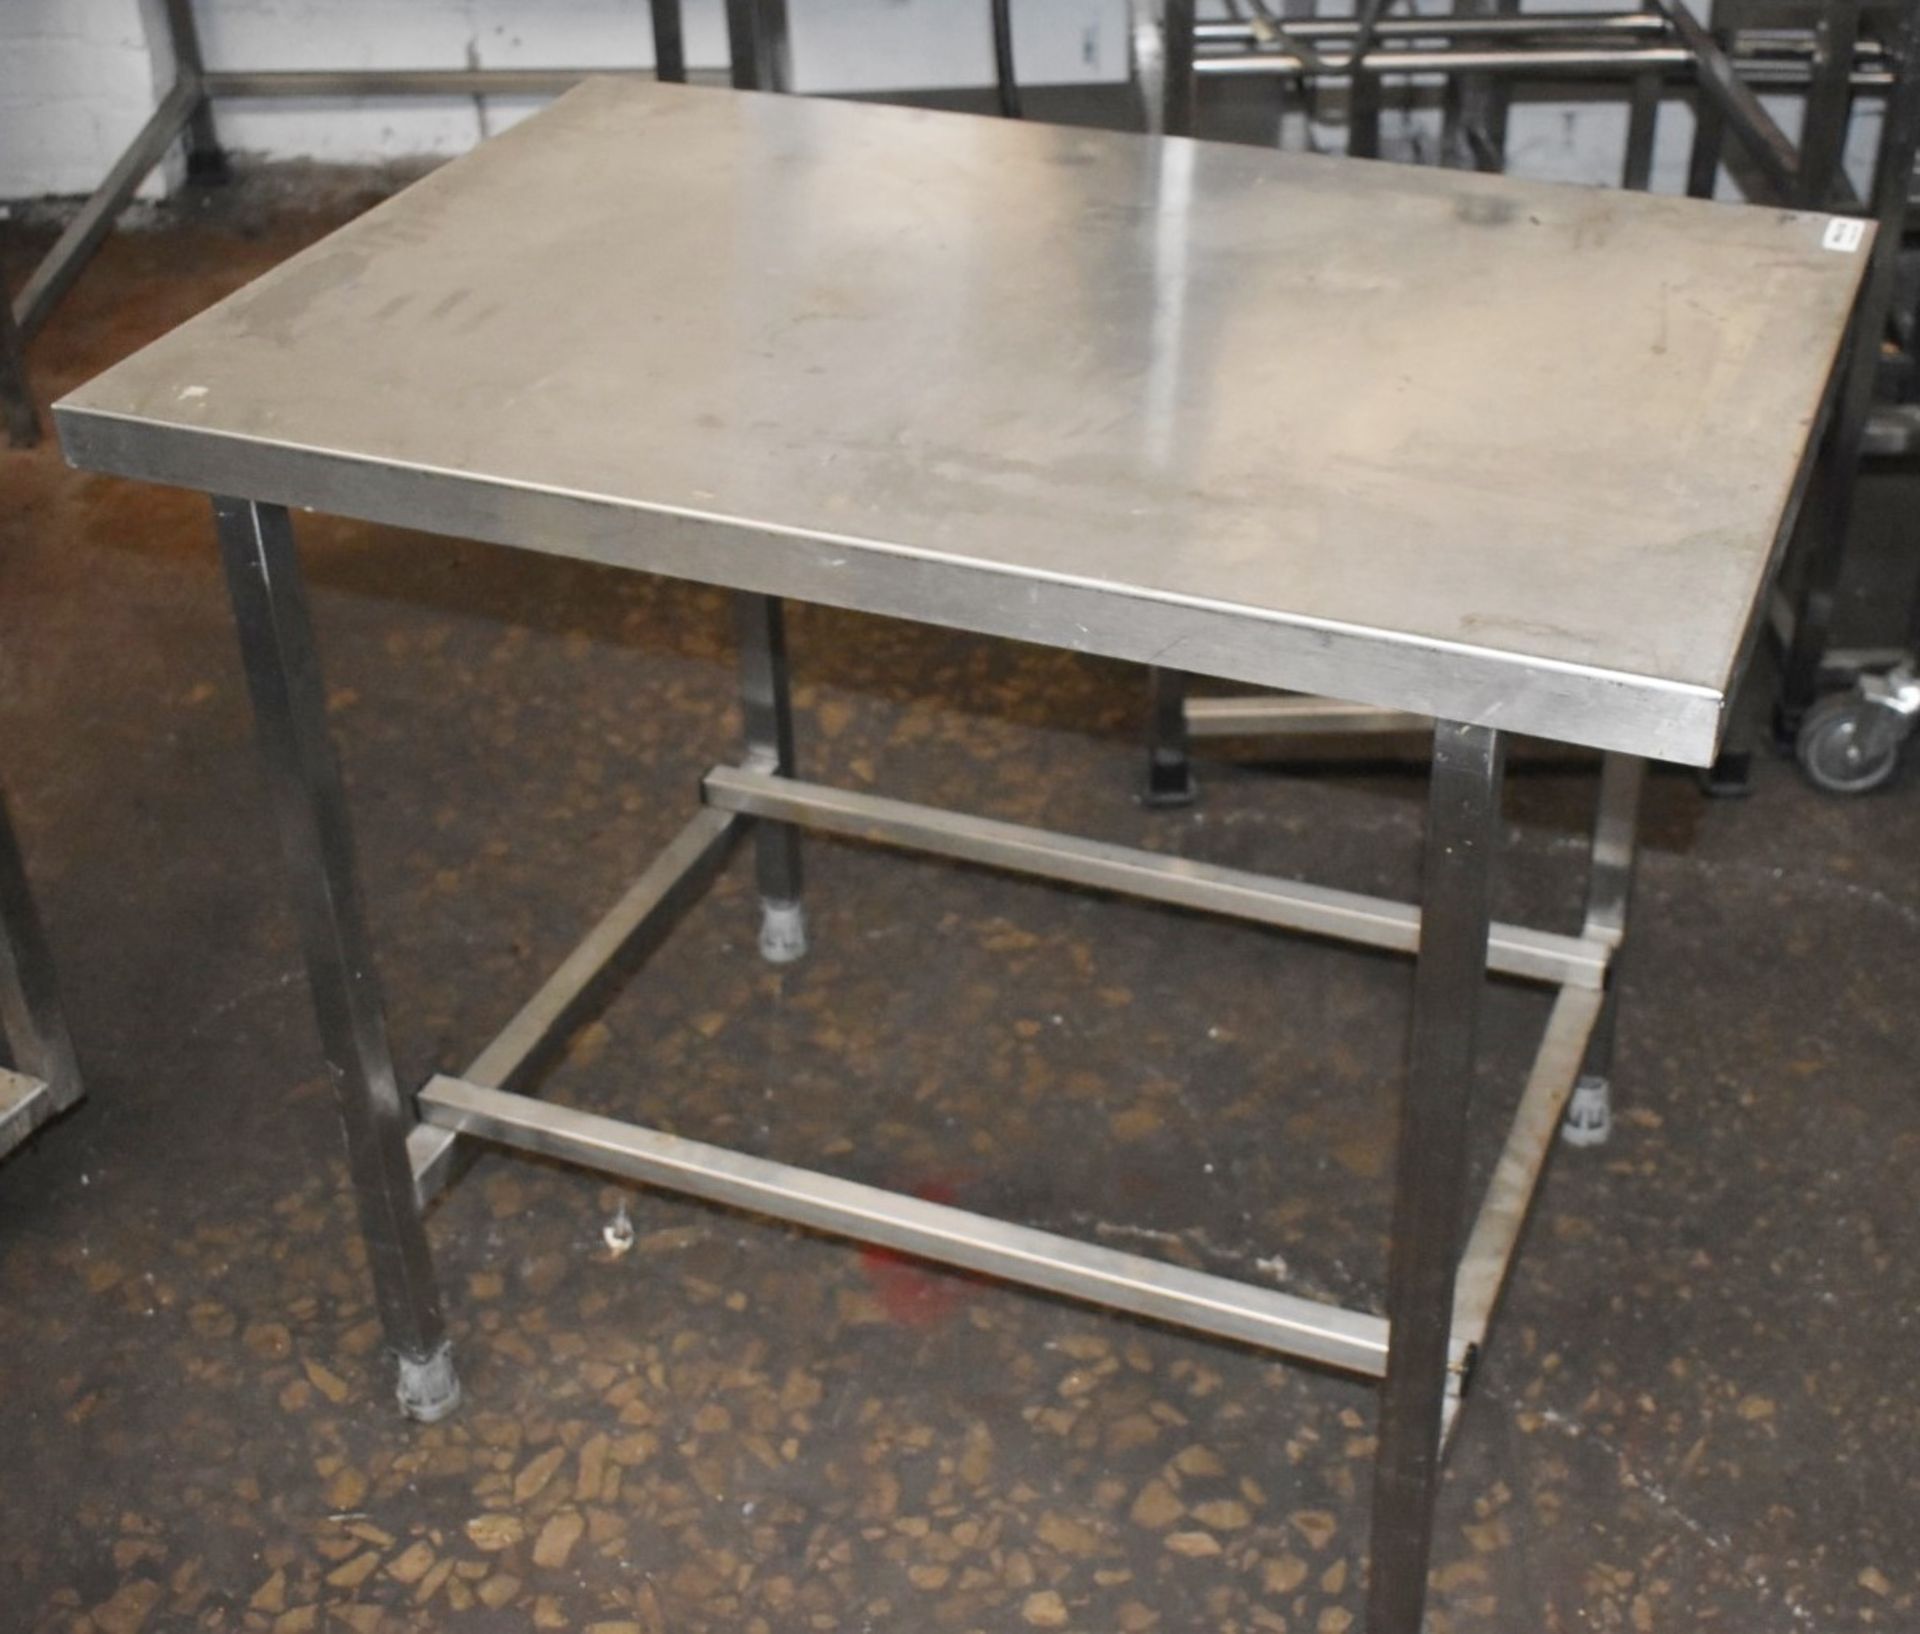 1 x Stainless Steel Prep Table - Size: H77 x W93 x D61 cms - CL675 - Ref: MMJ105 WH5 - Location: